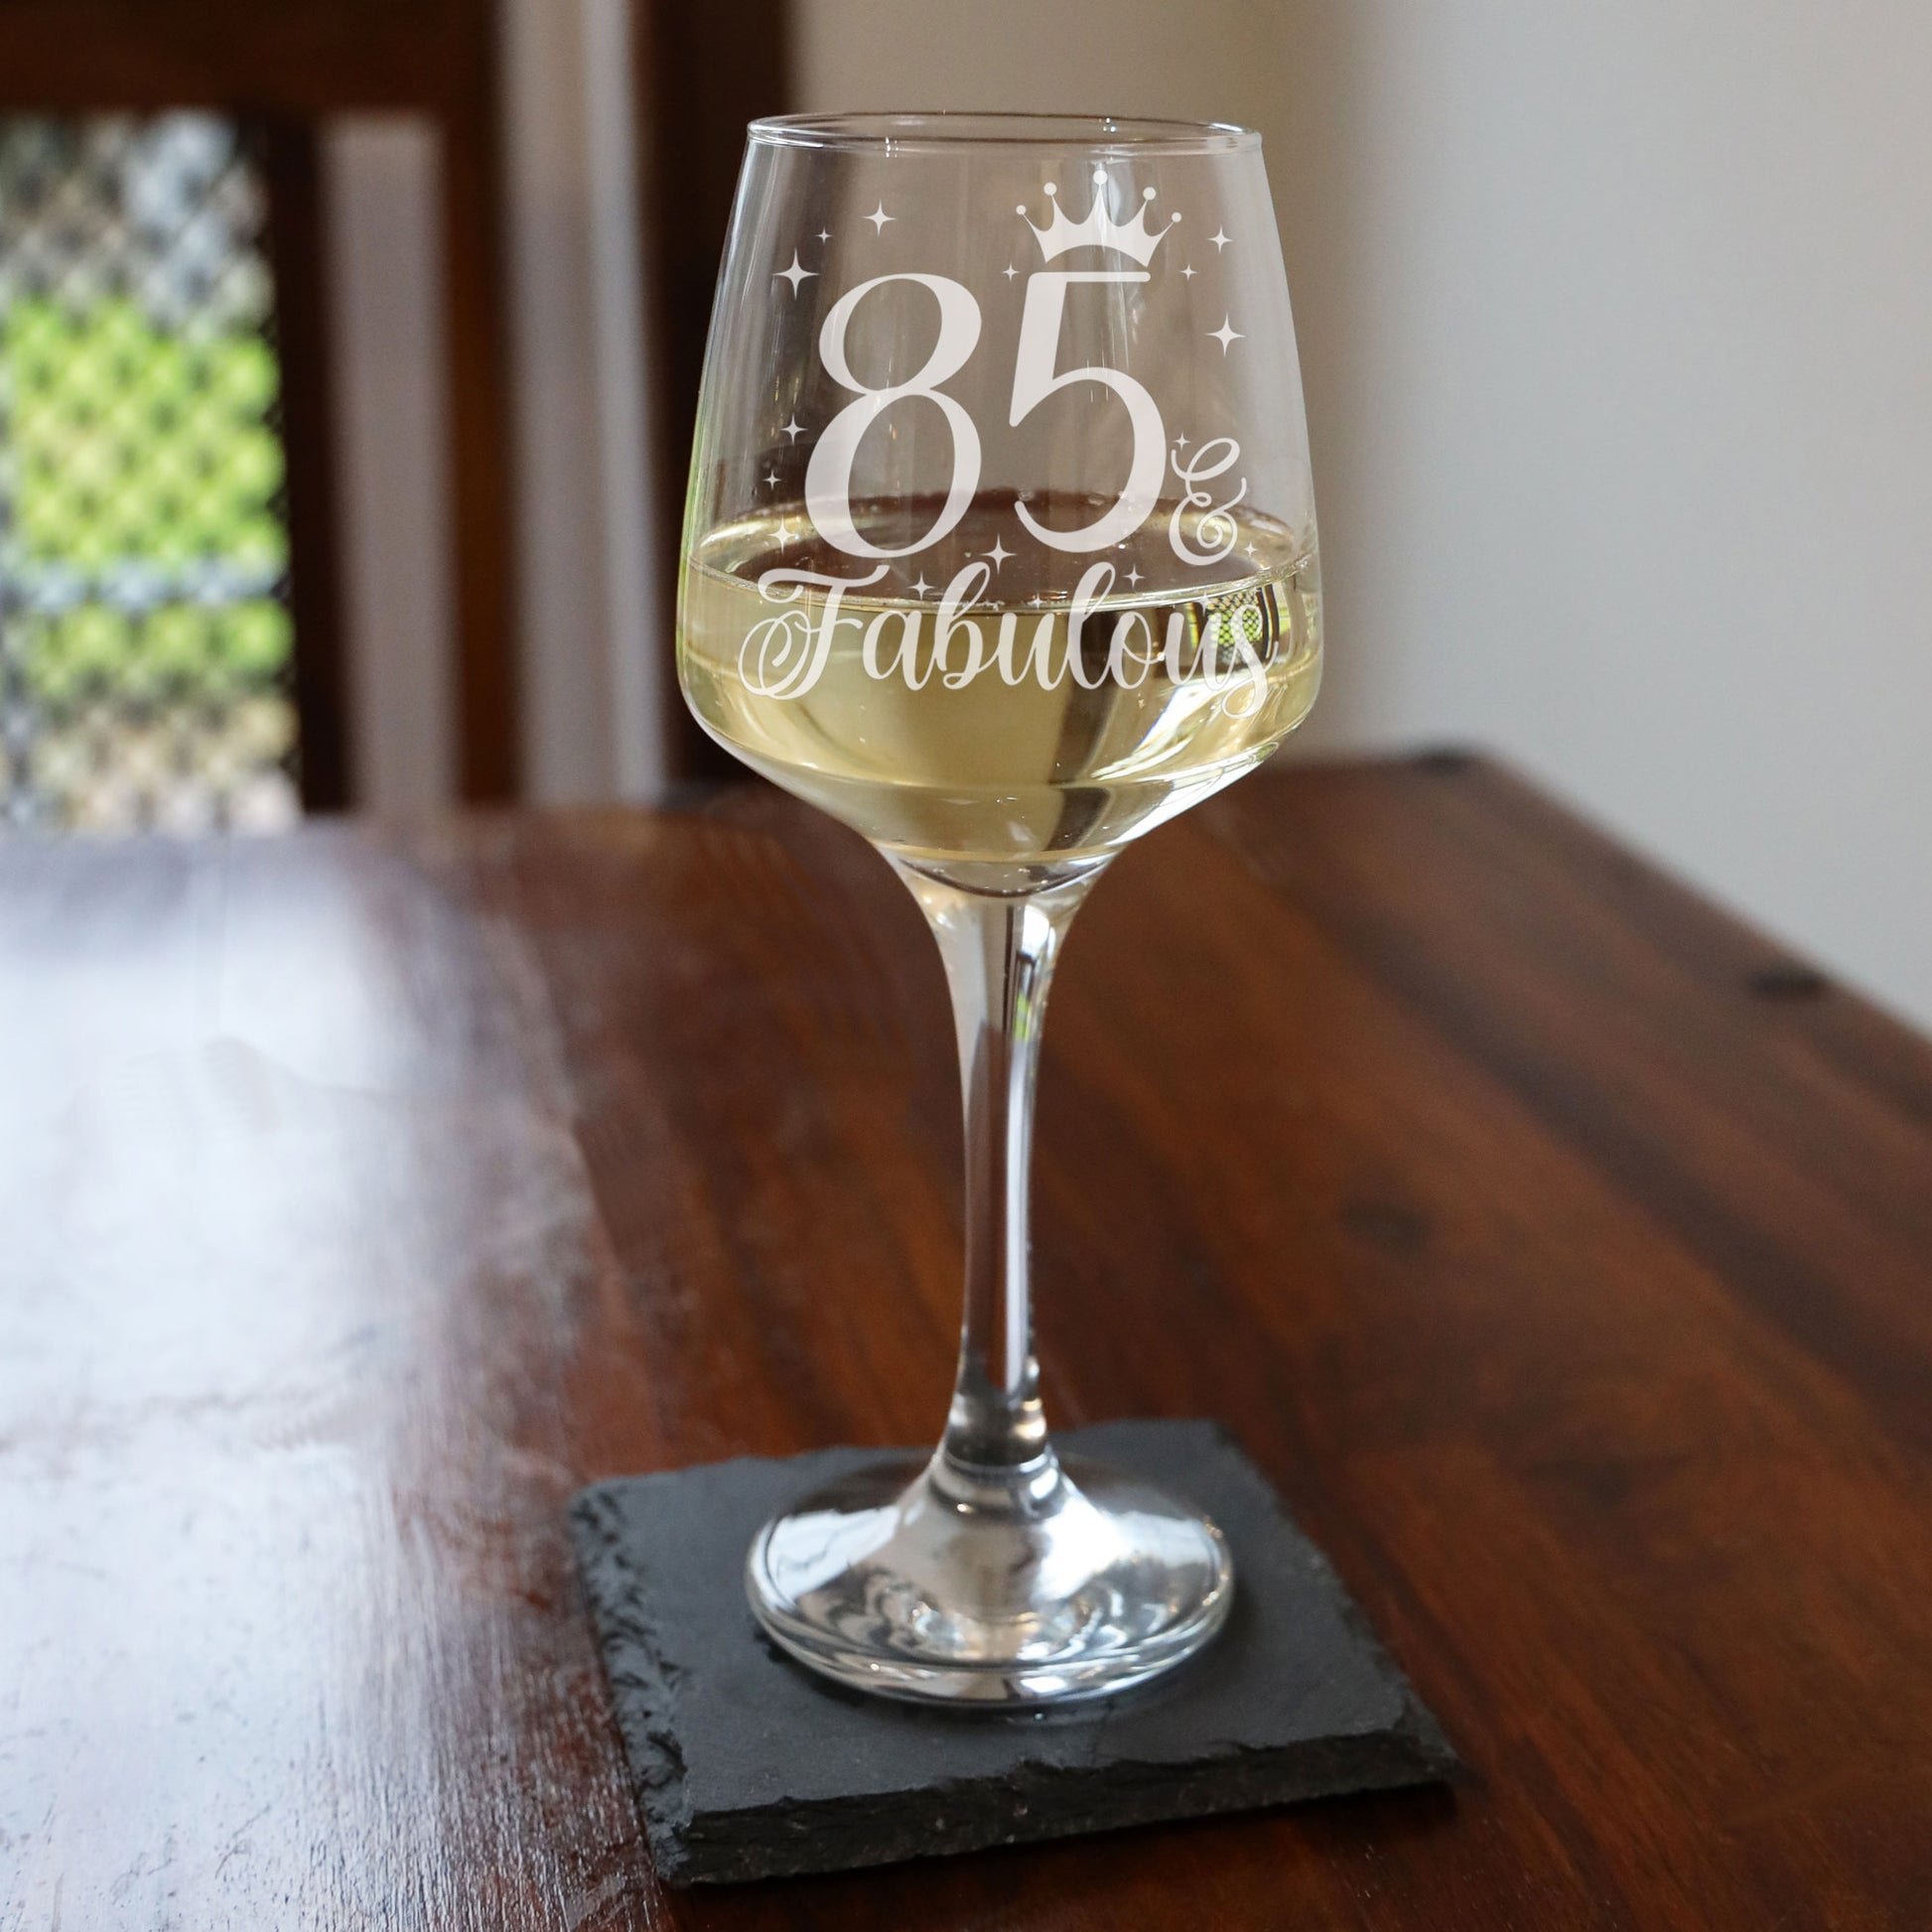 85 & Fabulous 85th Birthday Gift Engraved Wine Glass and/or Coaster Set  - Always Looking Good - Wine Glass Only  